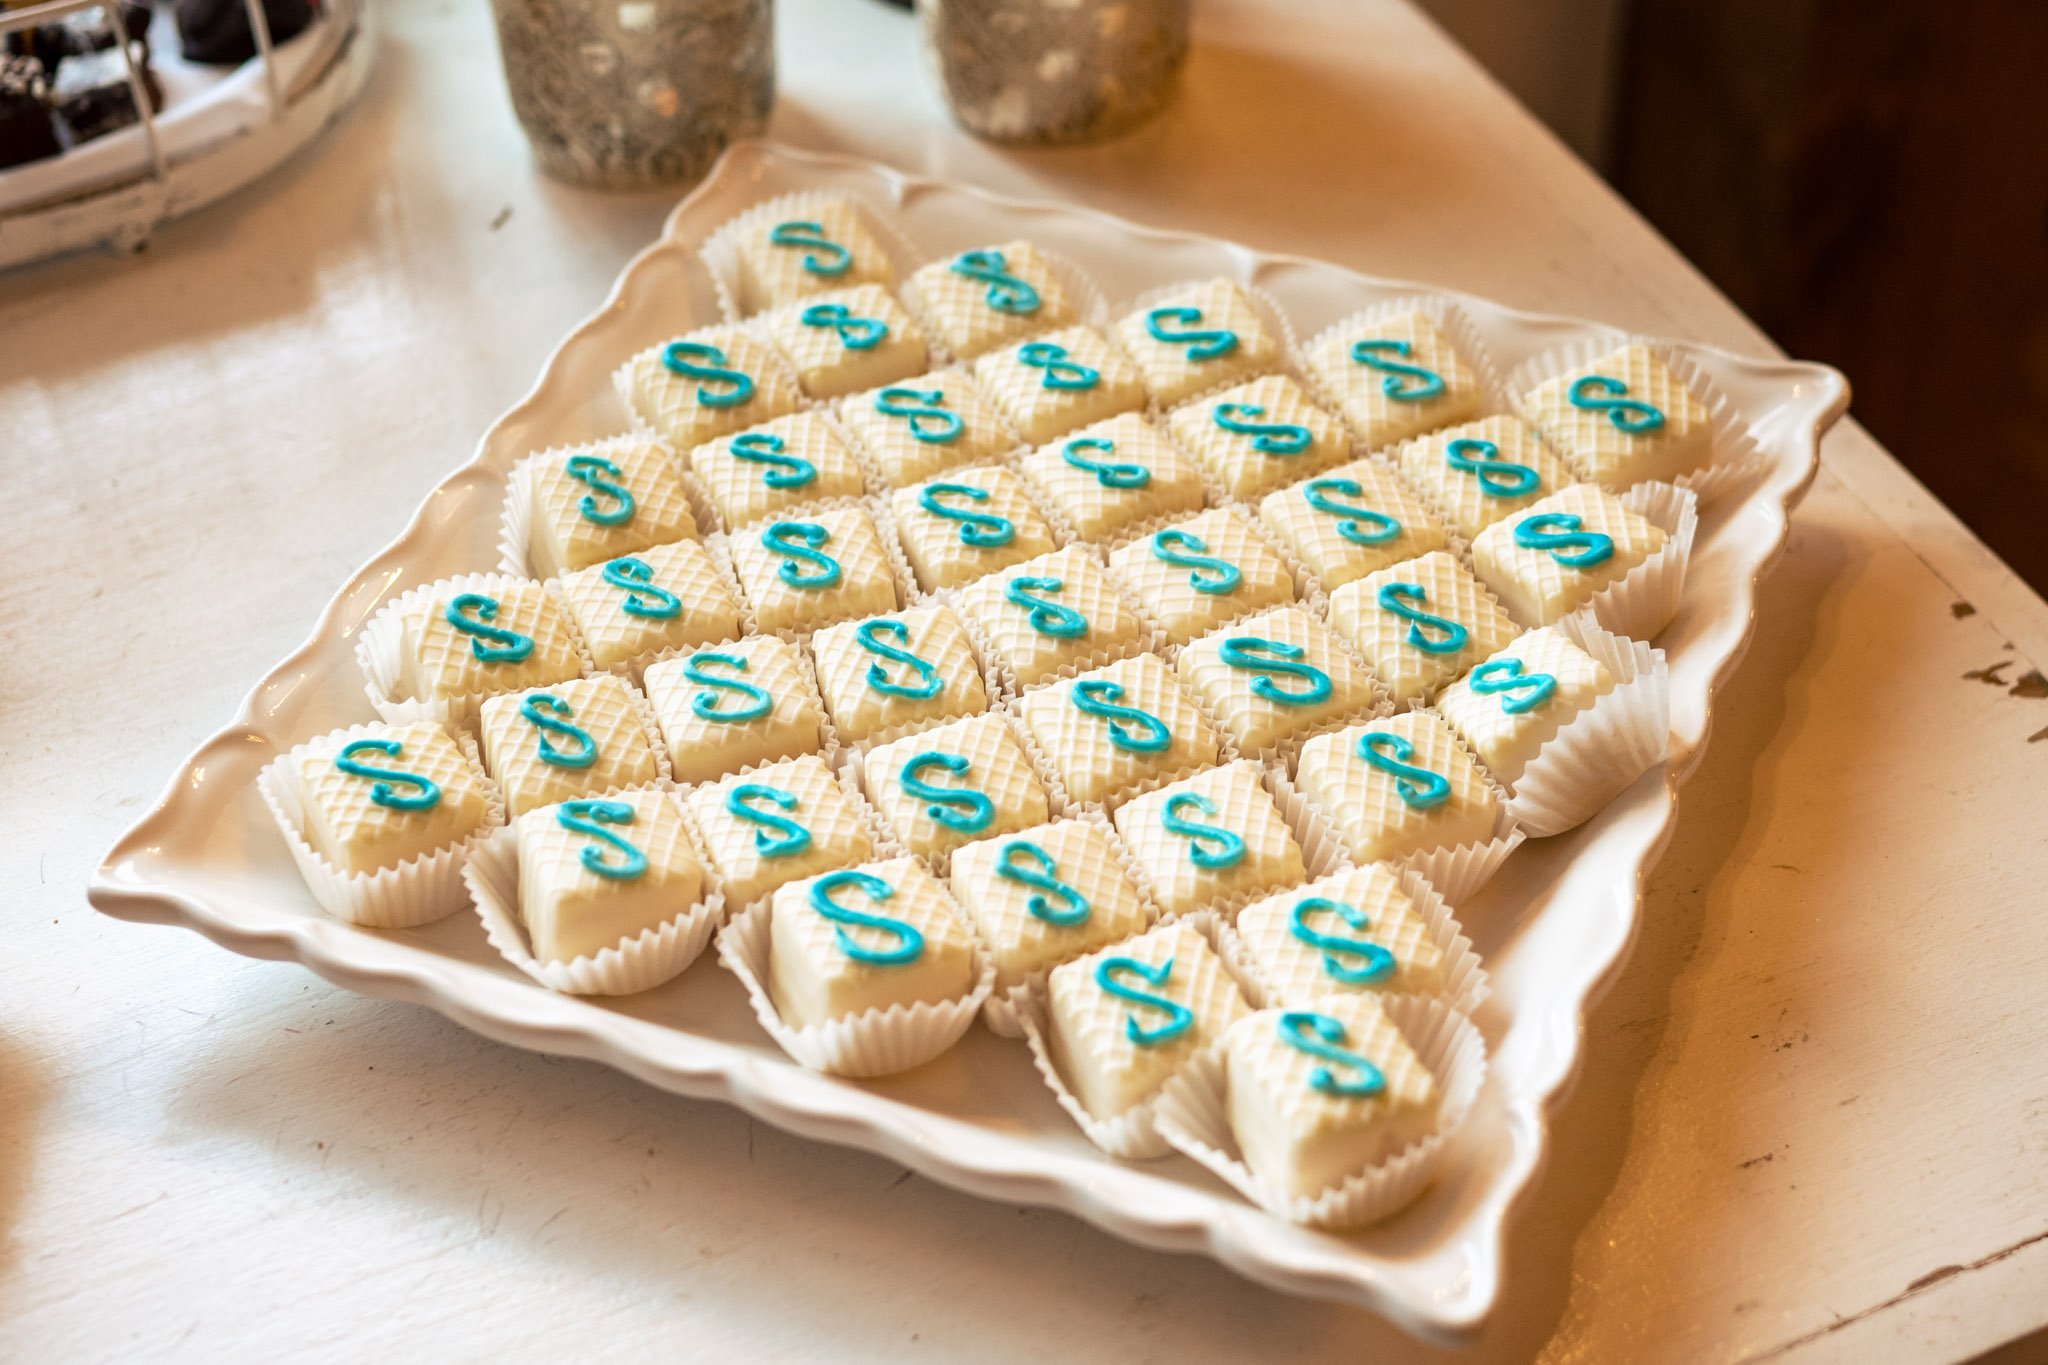 A tray of rectangular white chocolates decorated with a teal-colored letter 's' on top, presented on a white decorative plate at an Asheville wedding.